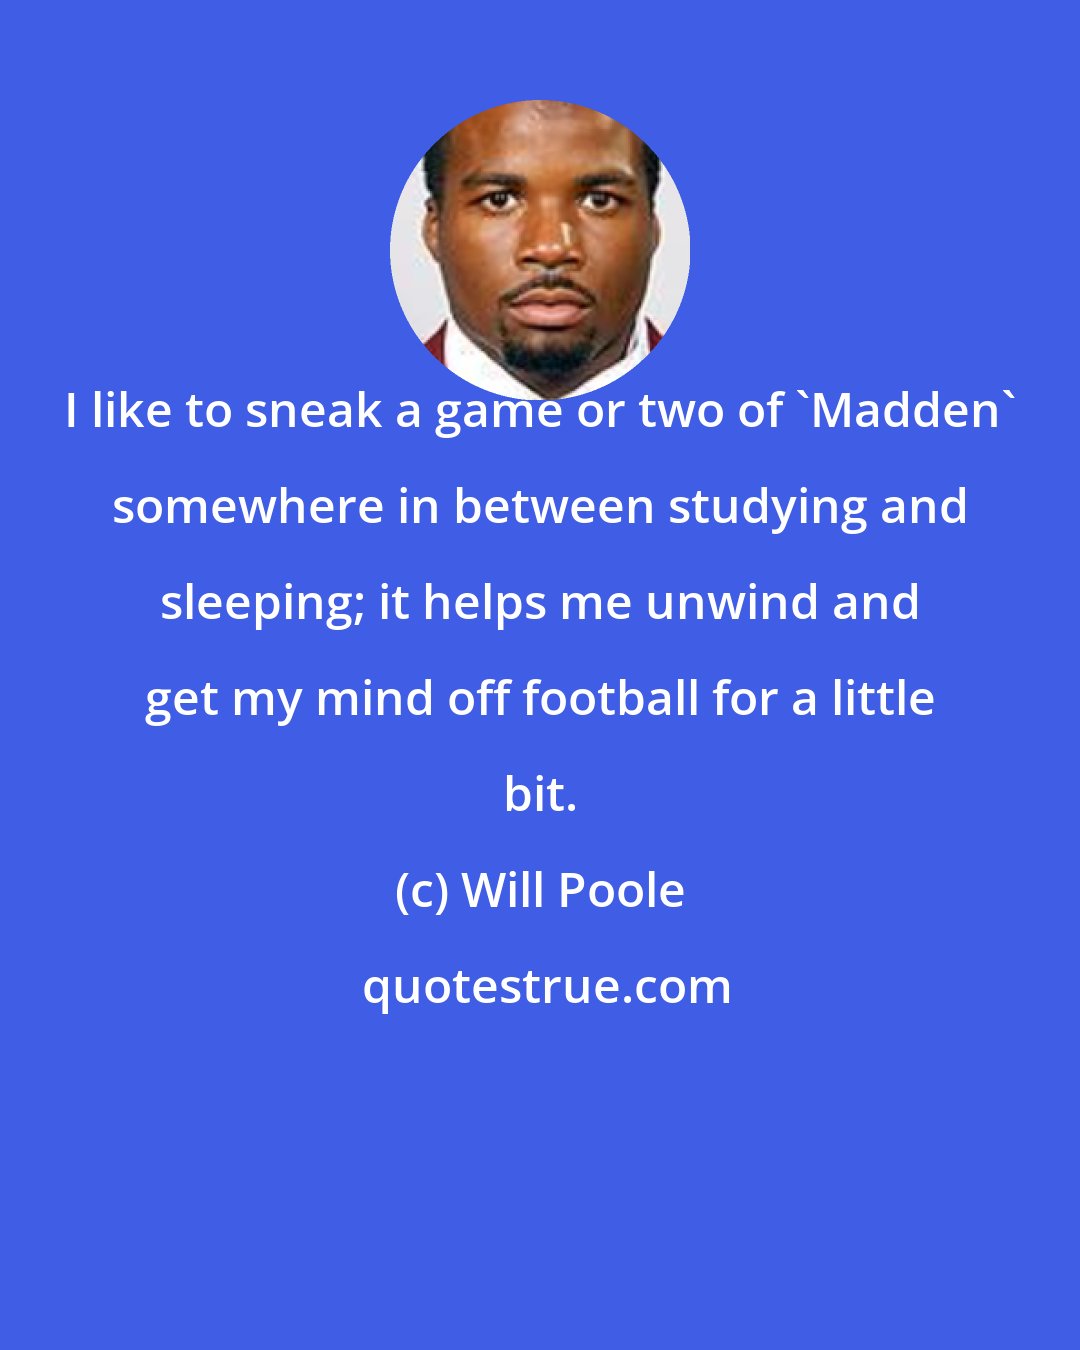 Will Poole: I like to sneak a game or two of 'Madden' somewhere in between studying and sleeping; it helps me unwind and get my mind off football for a little bit.